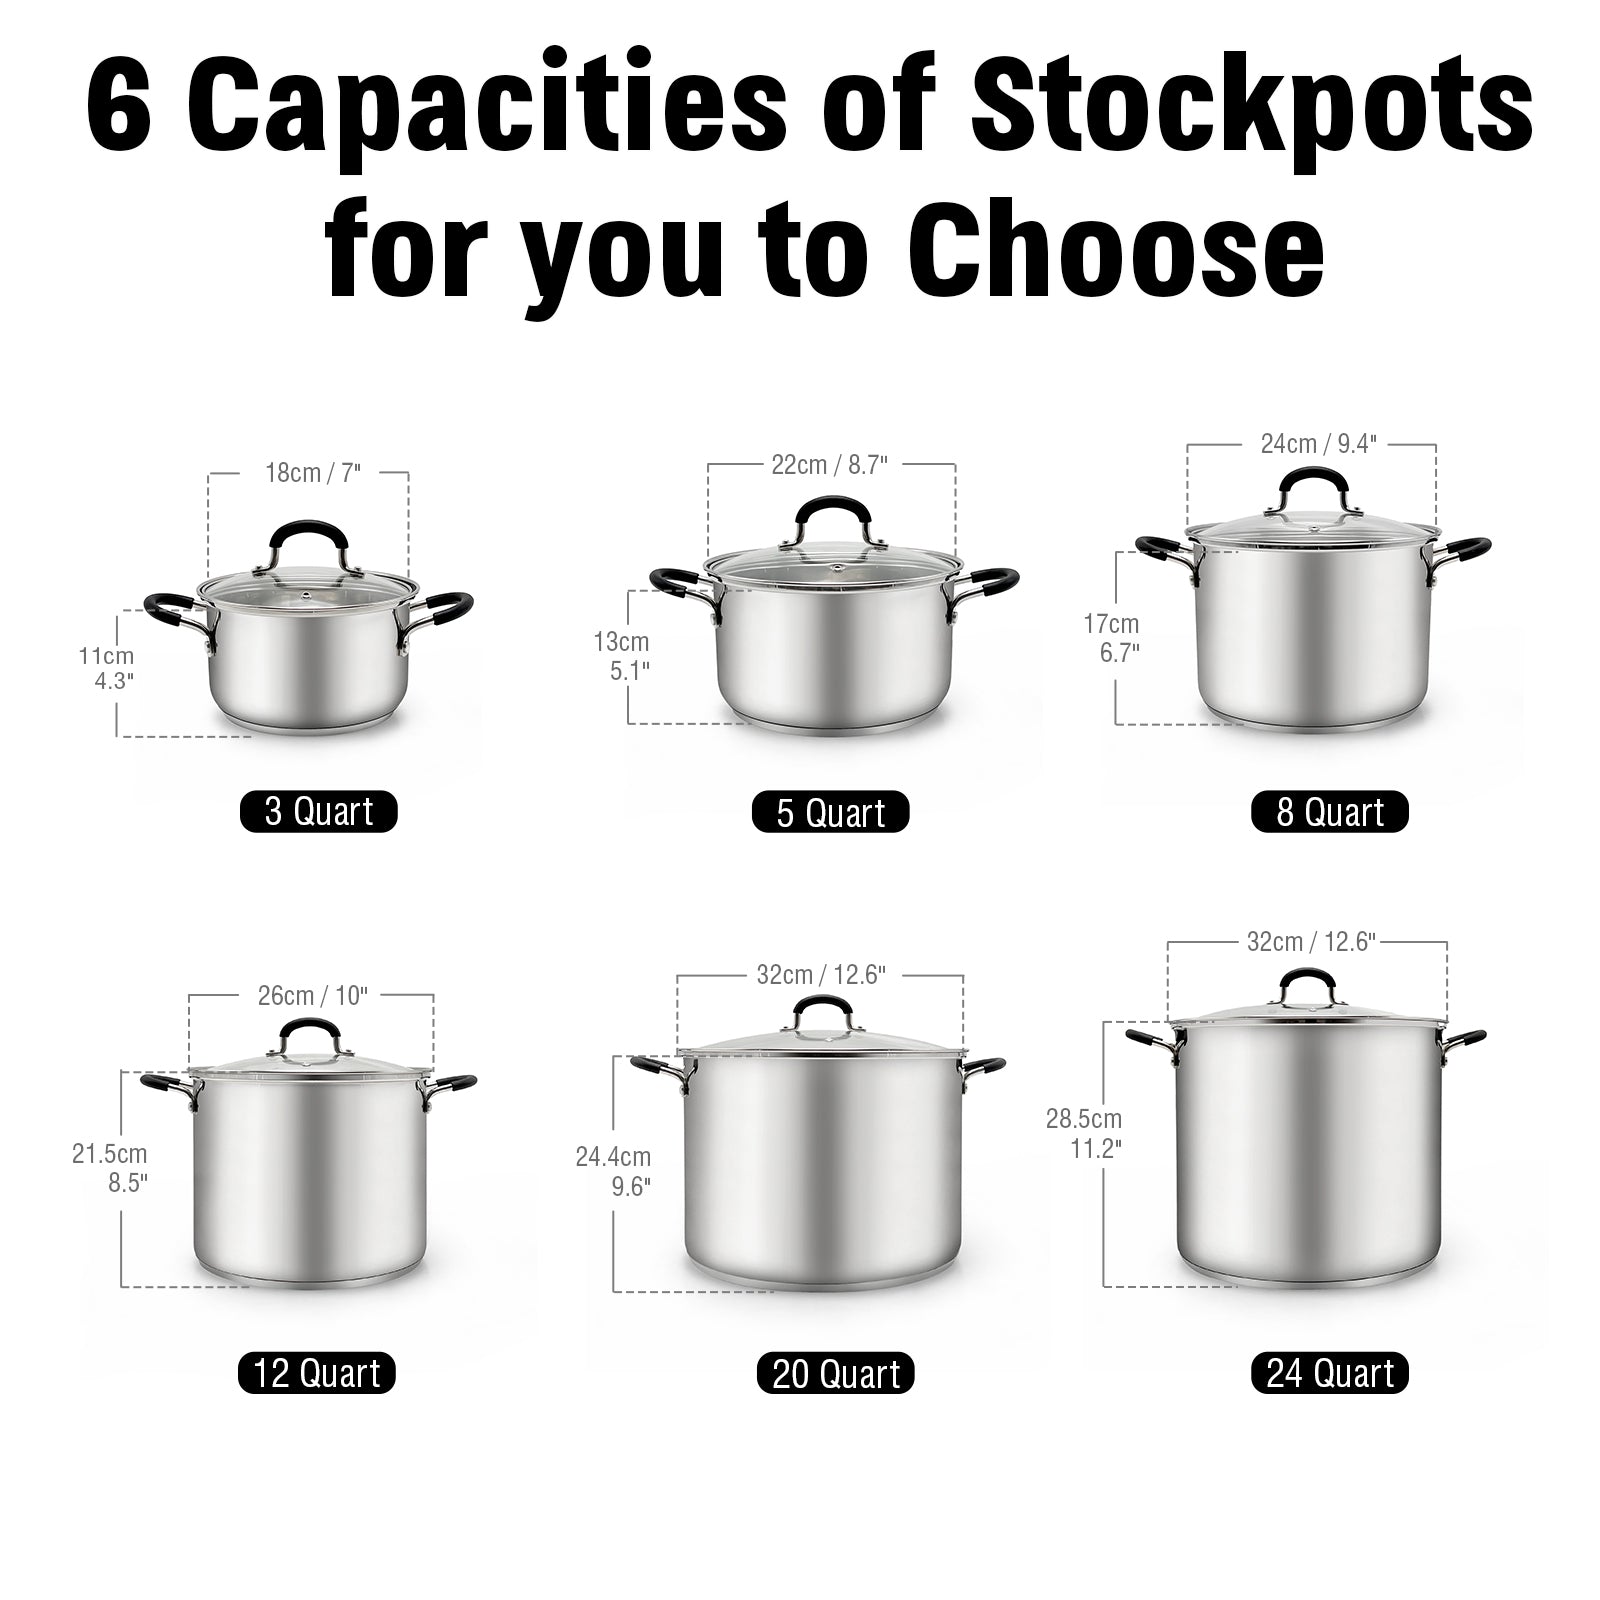 Stainless Steel Stockpot, P&P CHEF 4 Quart Stock Pot with Lid, Heat-Proof  Double Handles - Dishwasher Safe